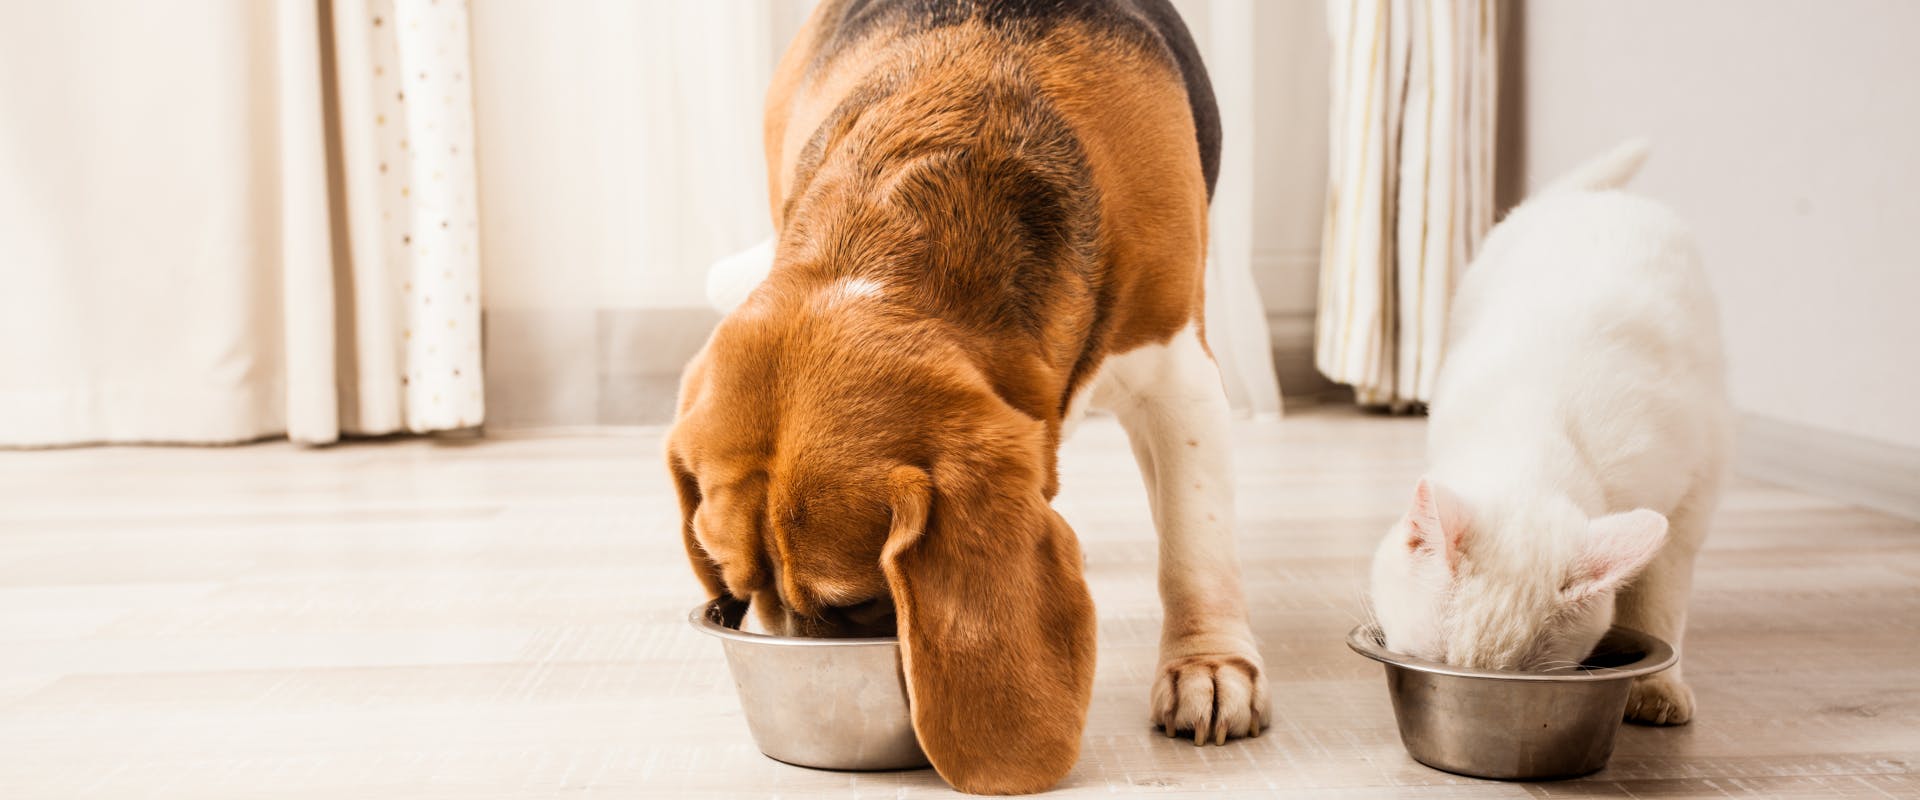 a beagle eating out of a silver dog bowl stood next to a short-haired white cat that is also eating out of a silver food bowl